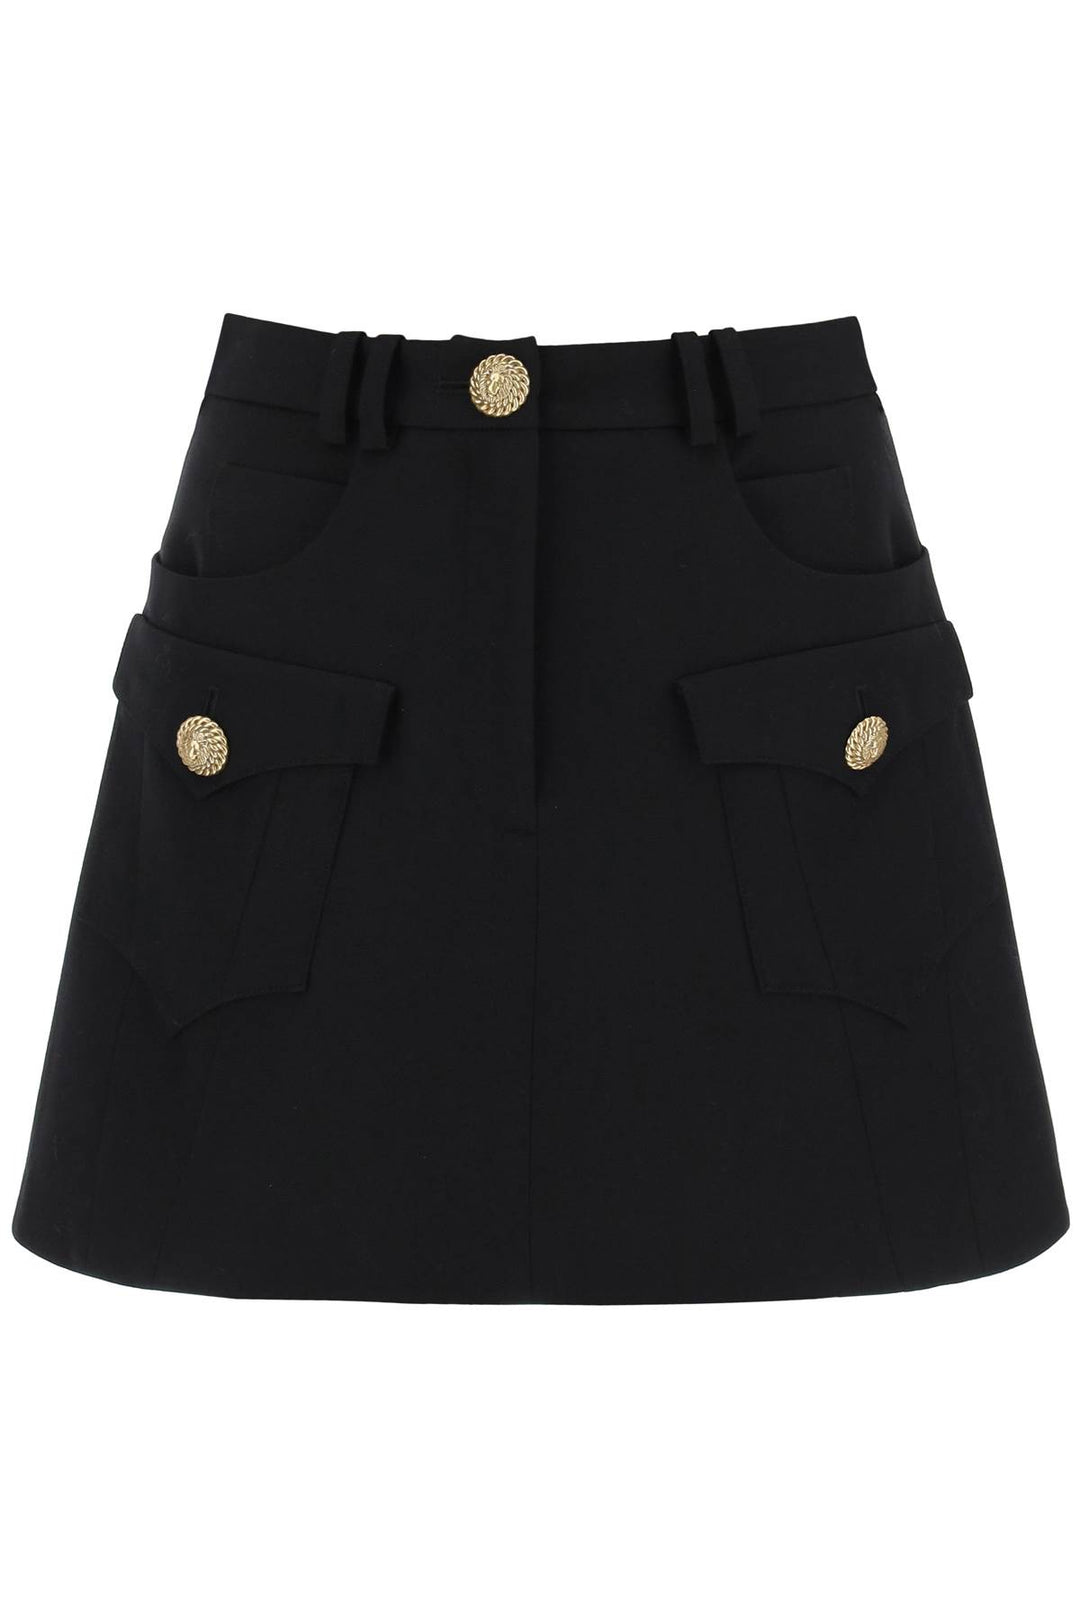 Balmain Trapeze Mini Skirt With Embossed Buttons   Nero